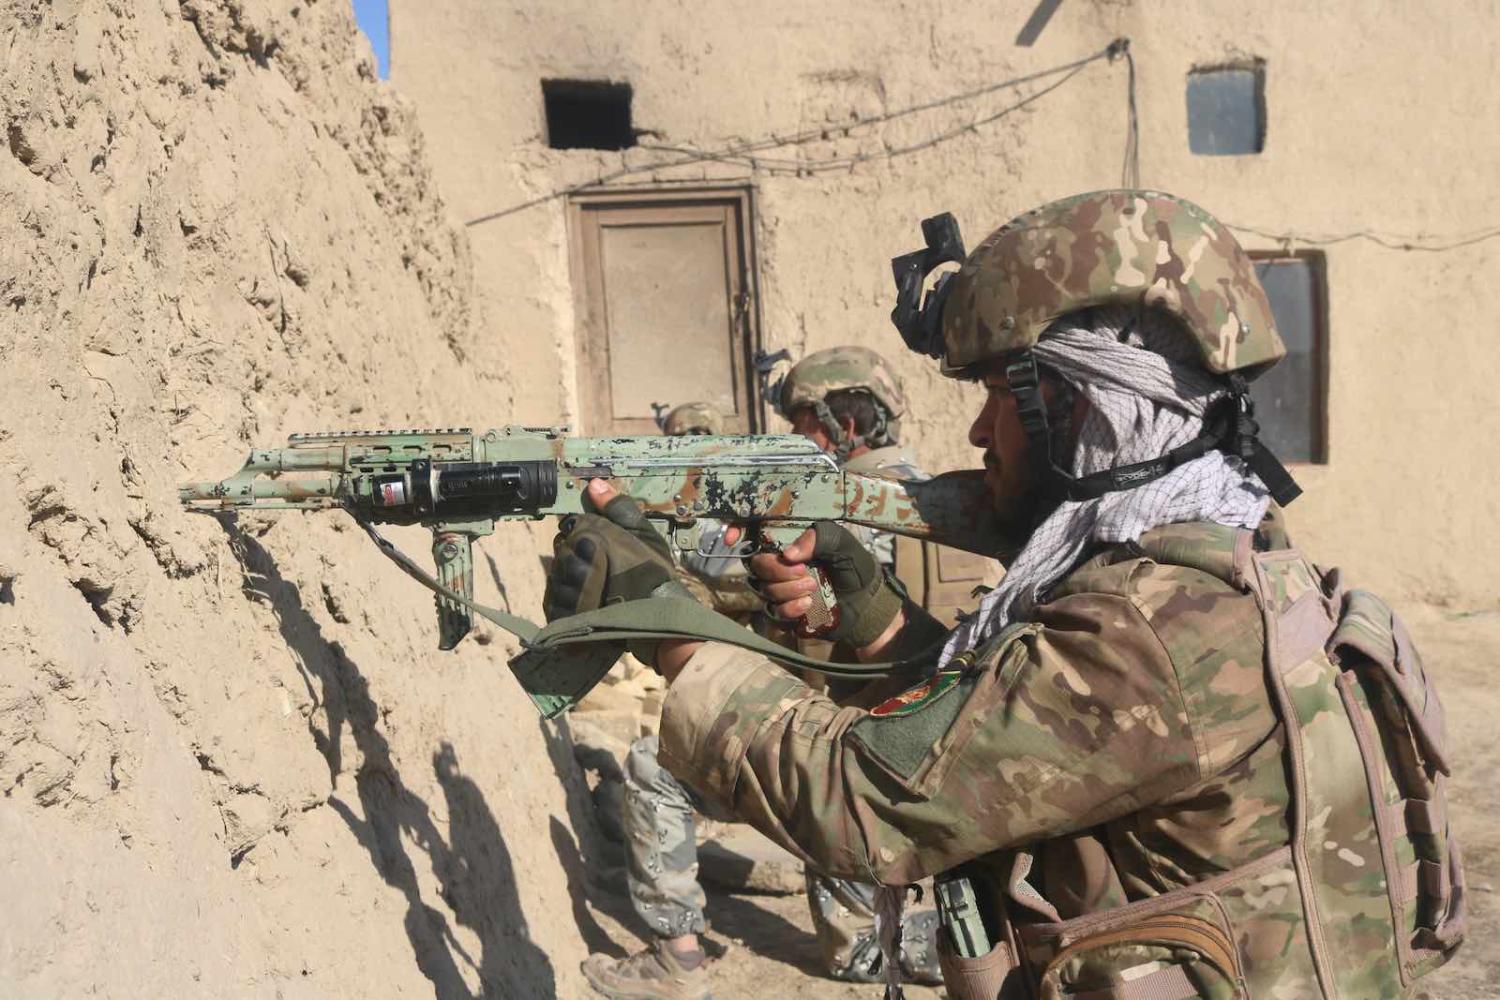 Afghan security forces in an operation against Taliban militants in Jawzjan province, Afghanistan, 16 February 2021 (Mohammad Jan Aria/Xinhua via Getty Images)